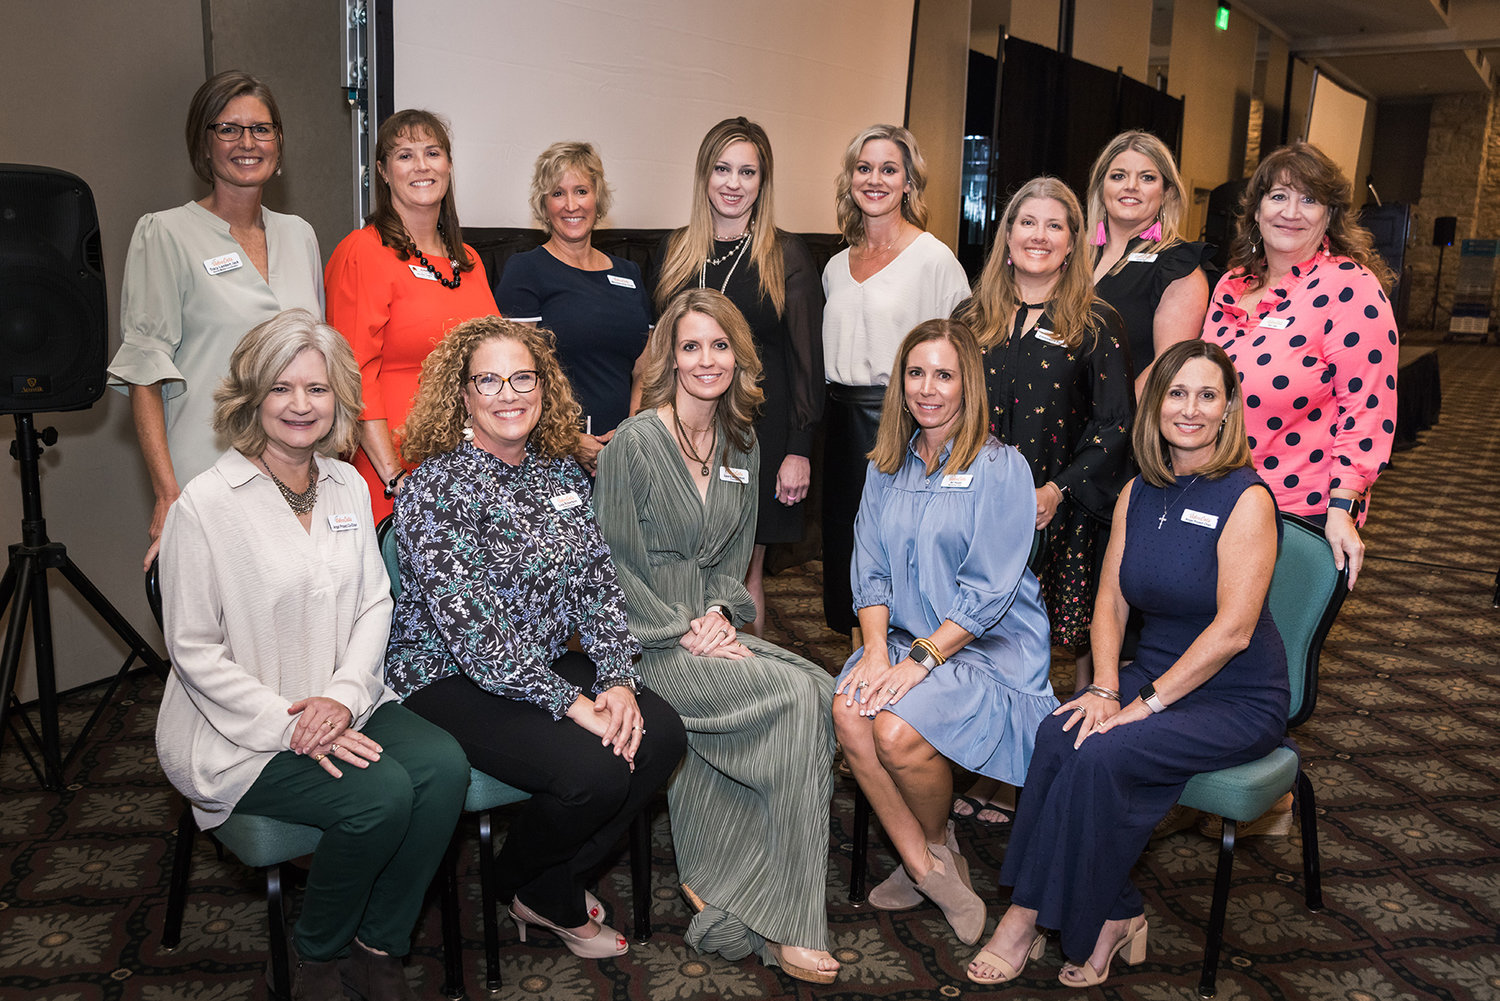 The Aledo Children’s AdvoCats held their Help & Hope Luncheon on Sept. 30 at Ridglea Country Club. Shown are board members who were at the event.